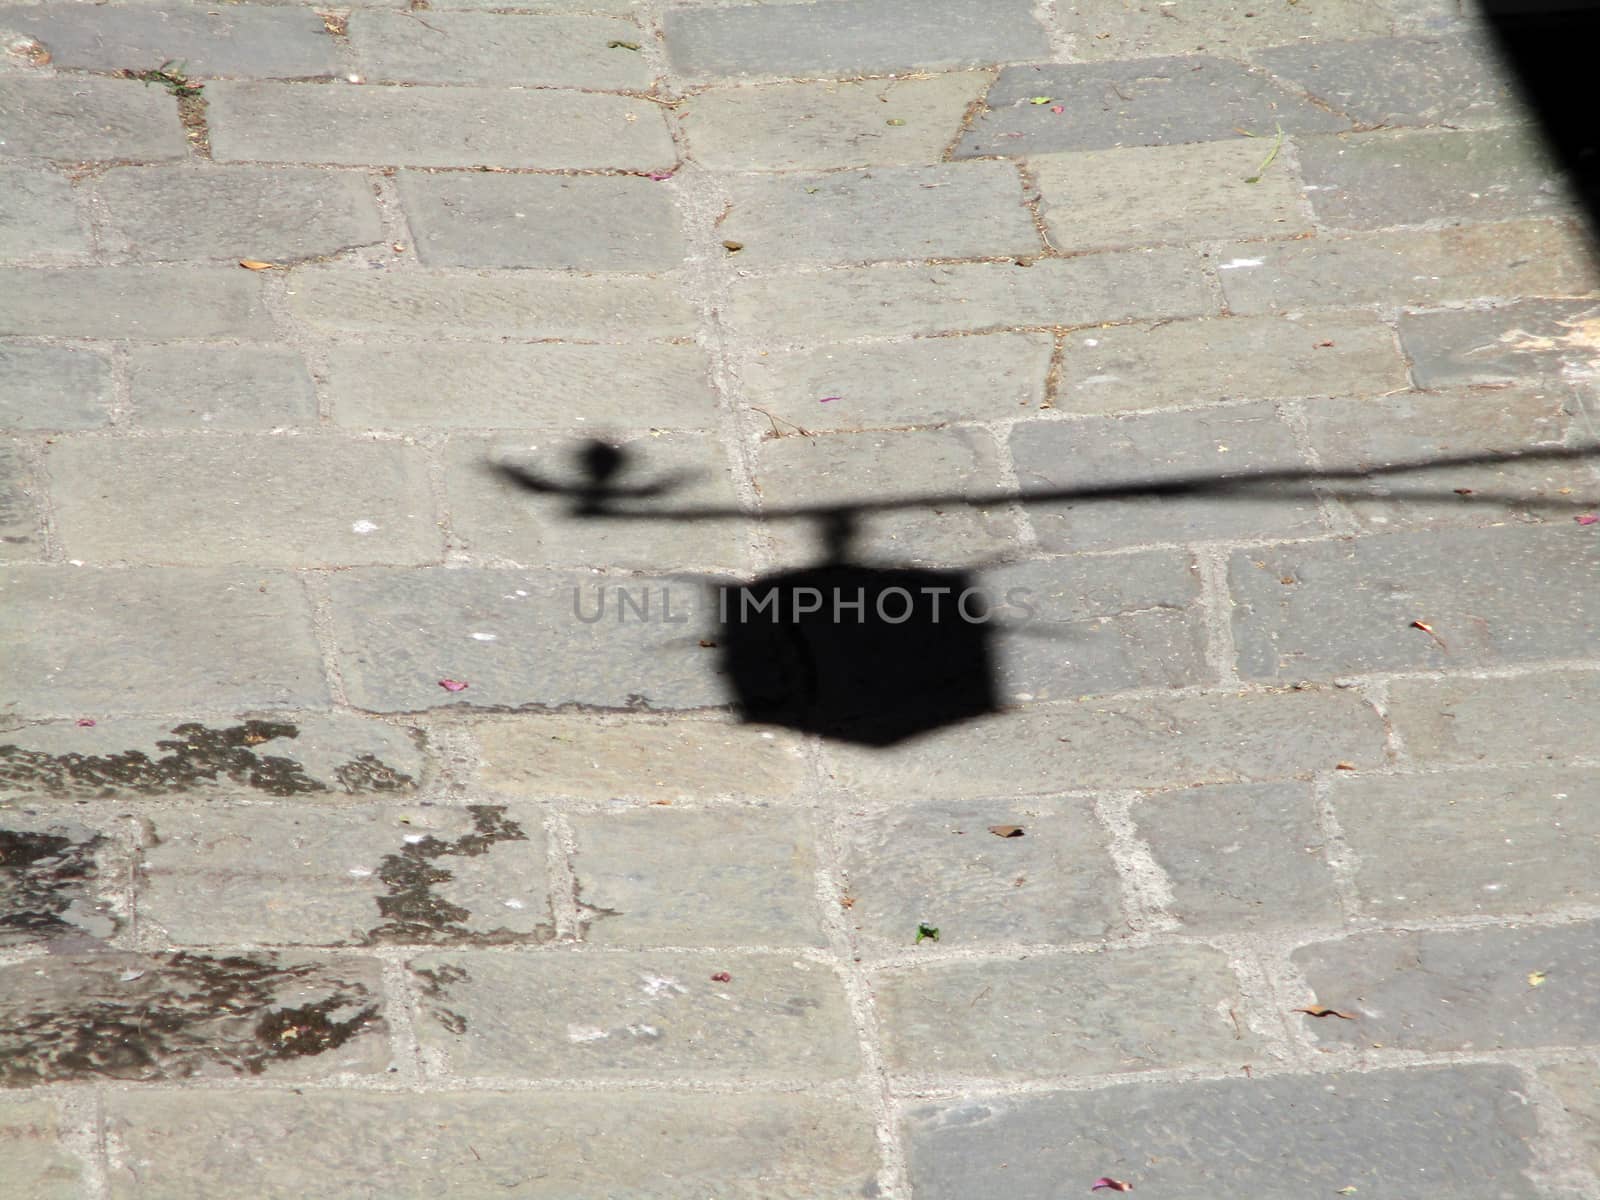 shadow of a lantern on the old cobblestones